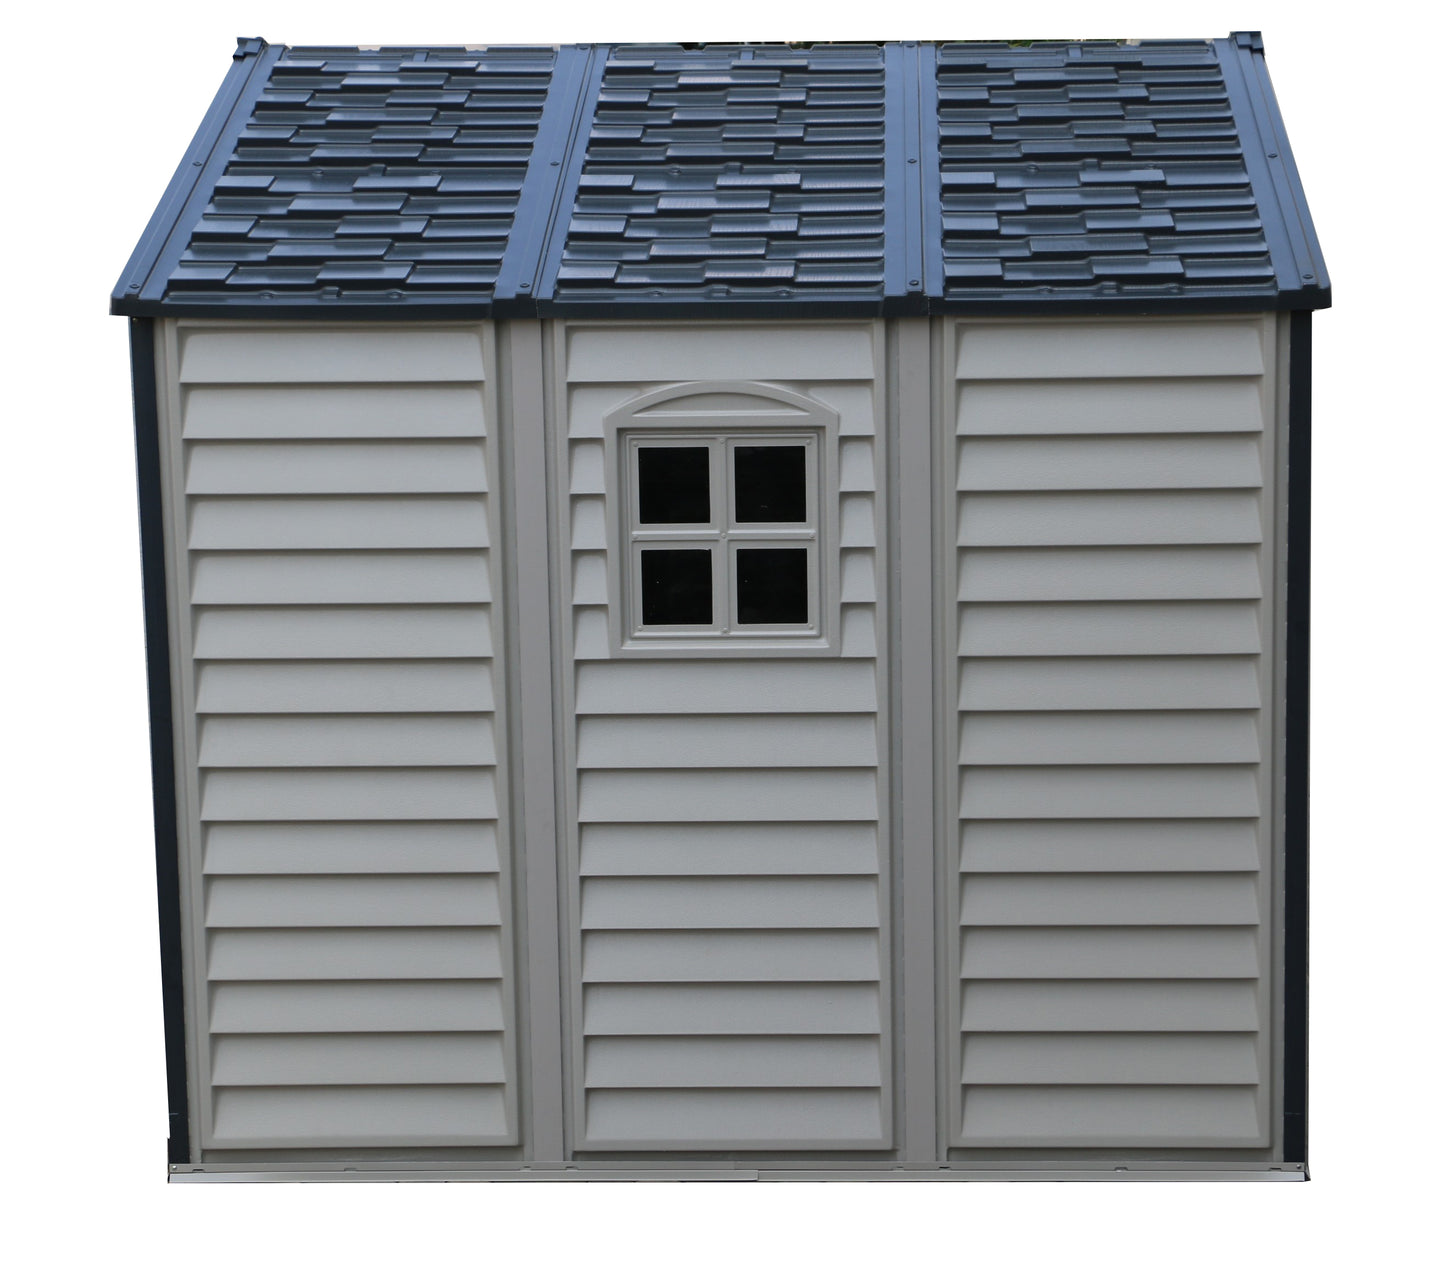 DuraMax Vinyl Shed Woodside Plus 10.5 x 8 with Foundation Kit